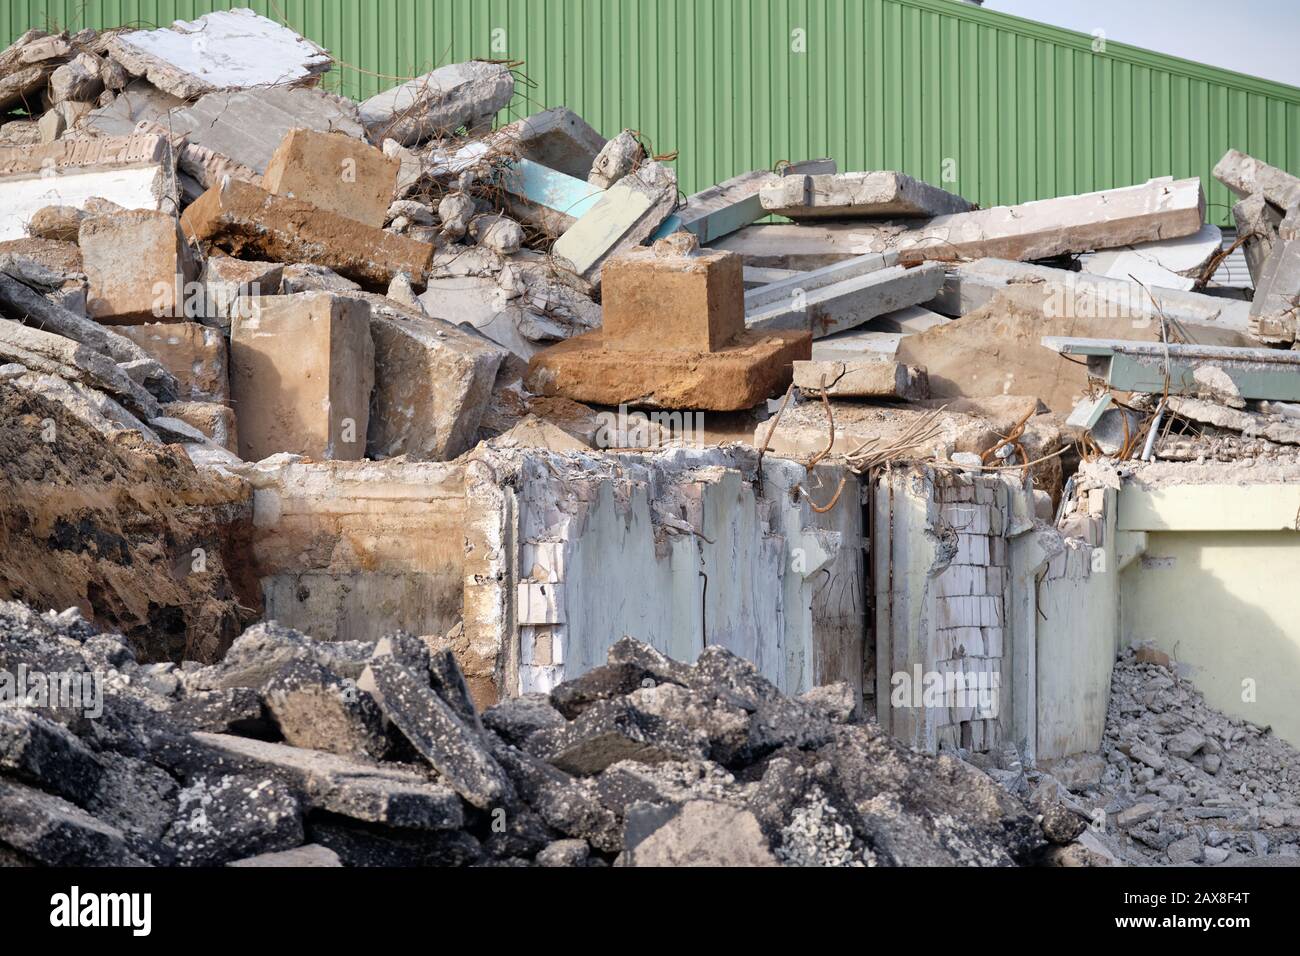 Close-up of demolitioned industrial building with the rubble lying everywhere on the construction site. Seen in Germany in February. Stock Photo